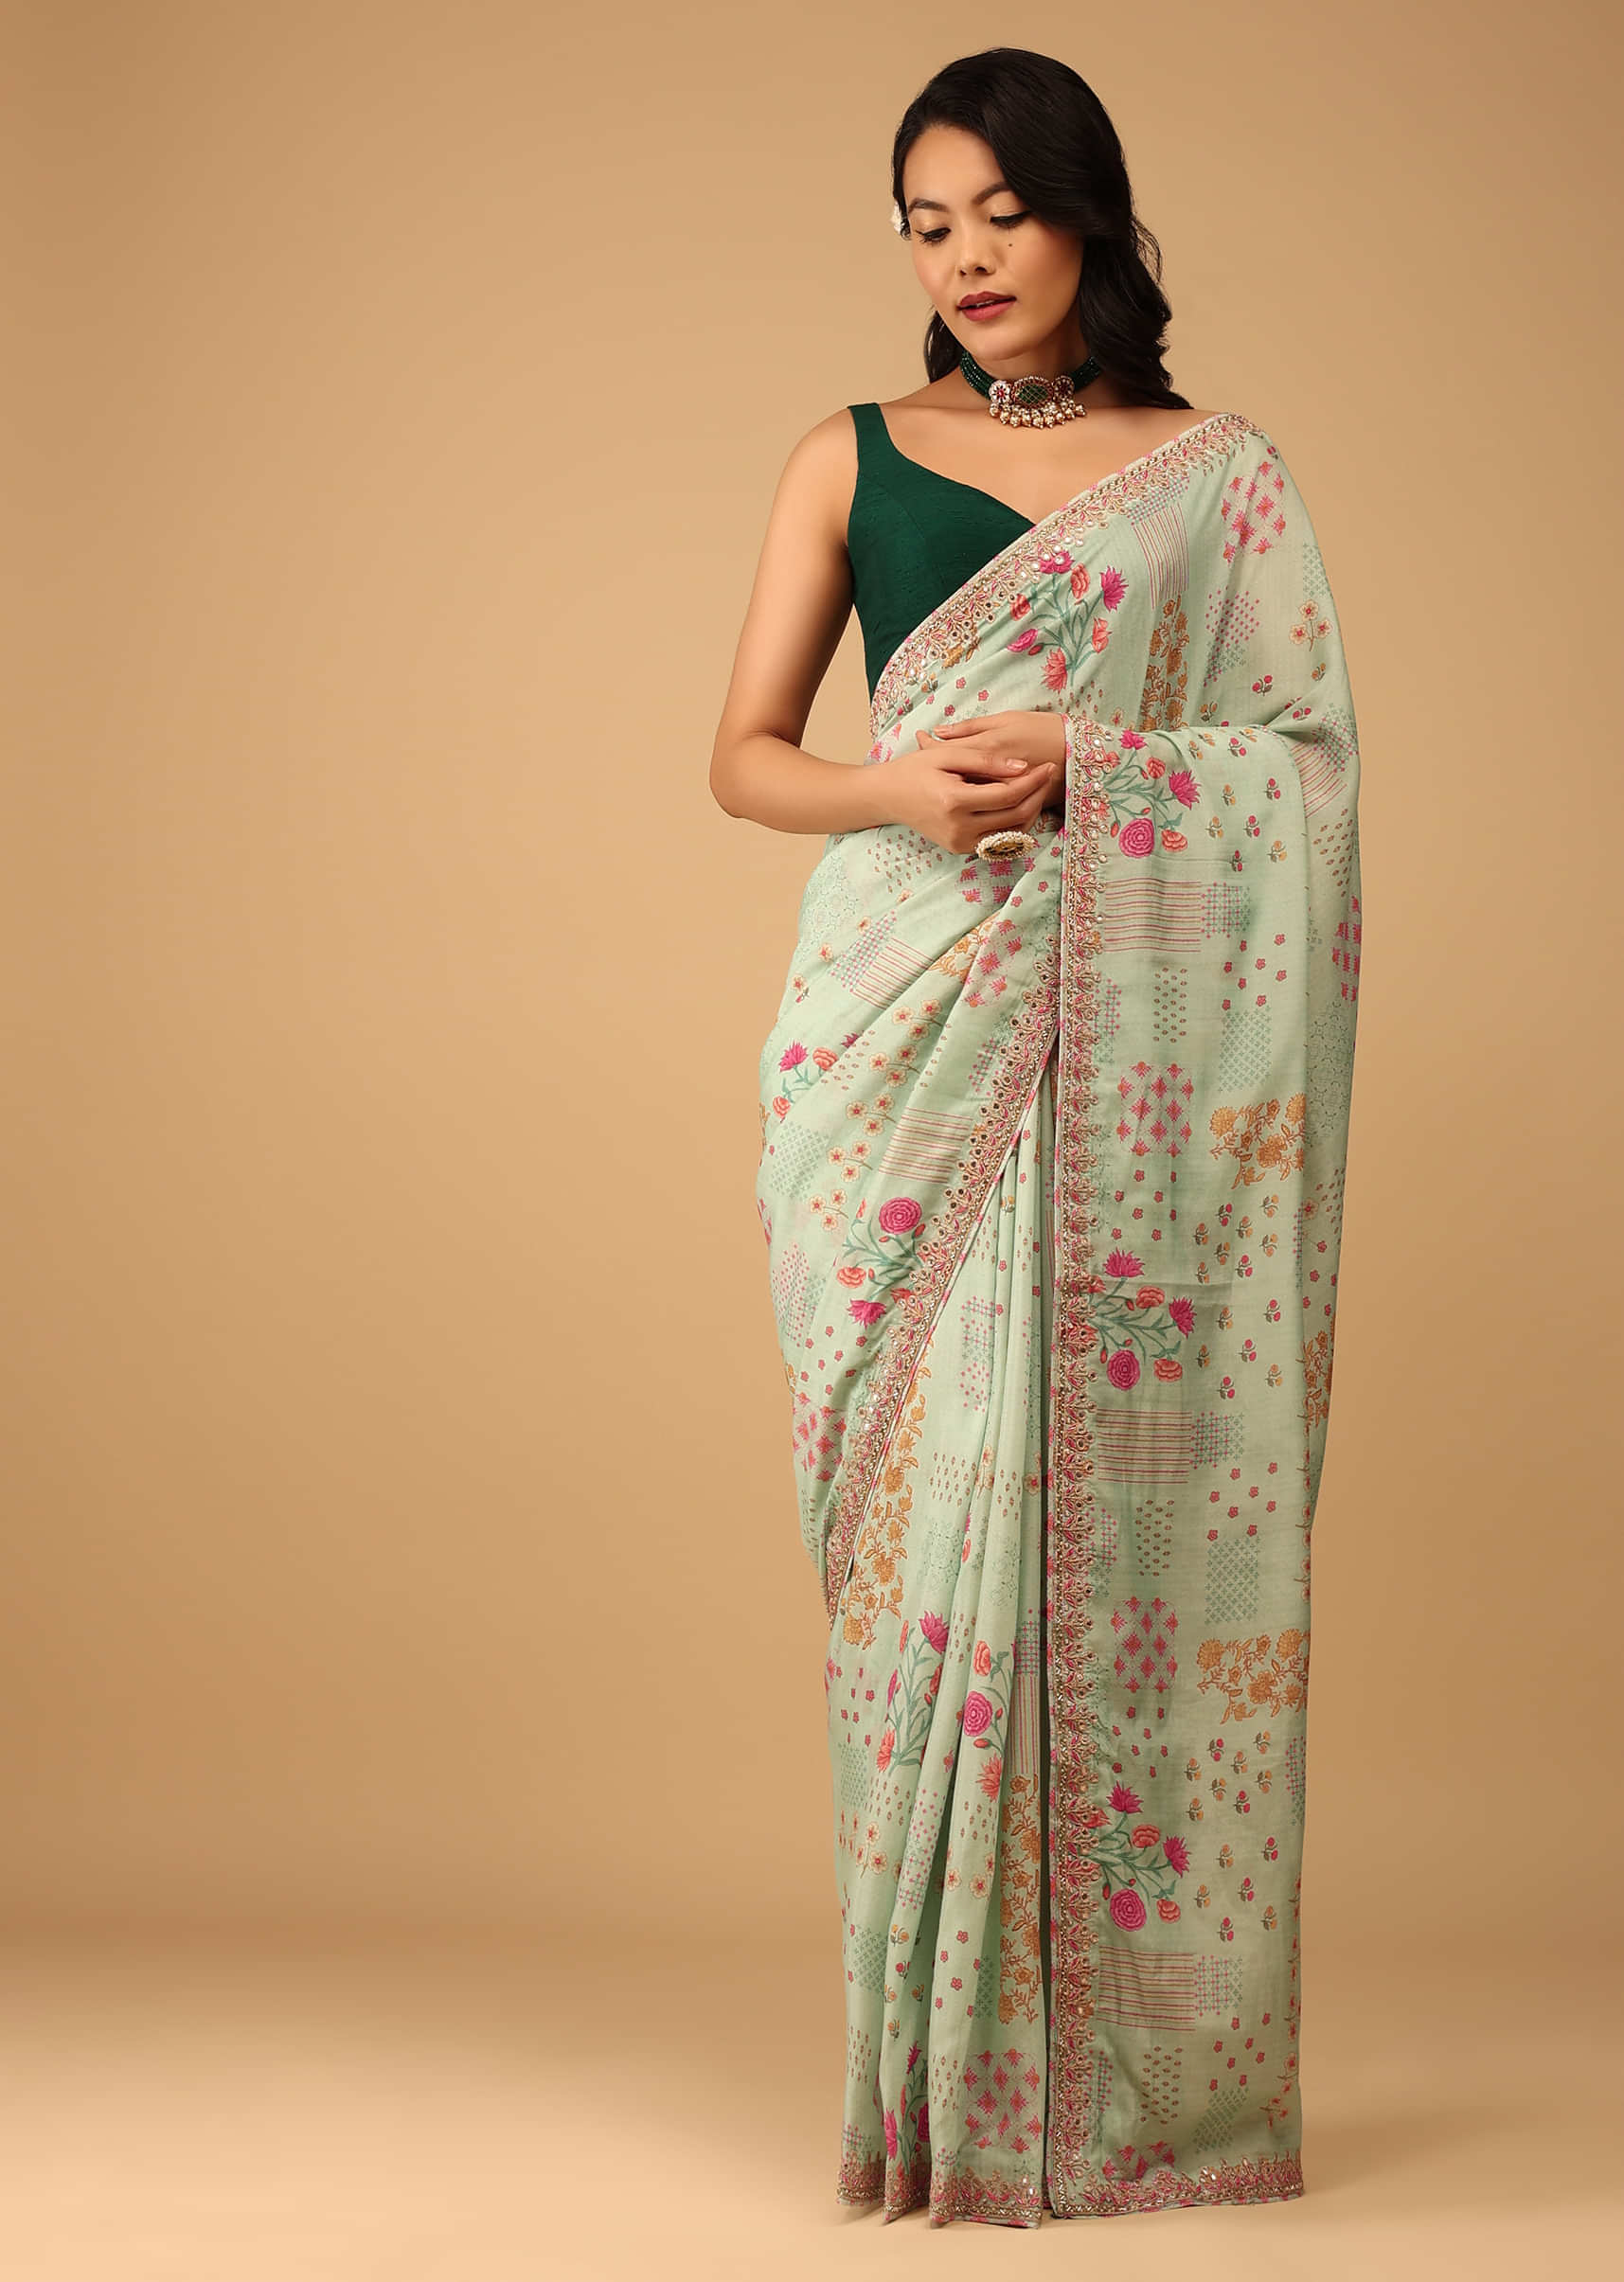 Powder Green Saree In Muslin With Floral Handblock Print And Embroidery